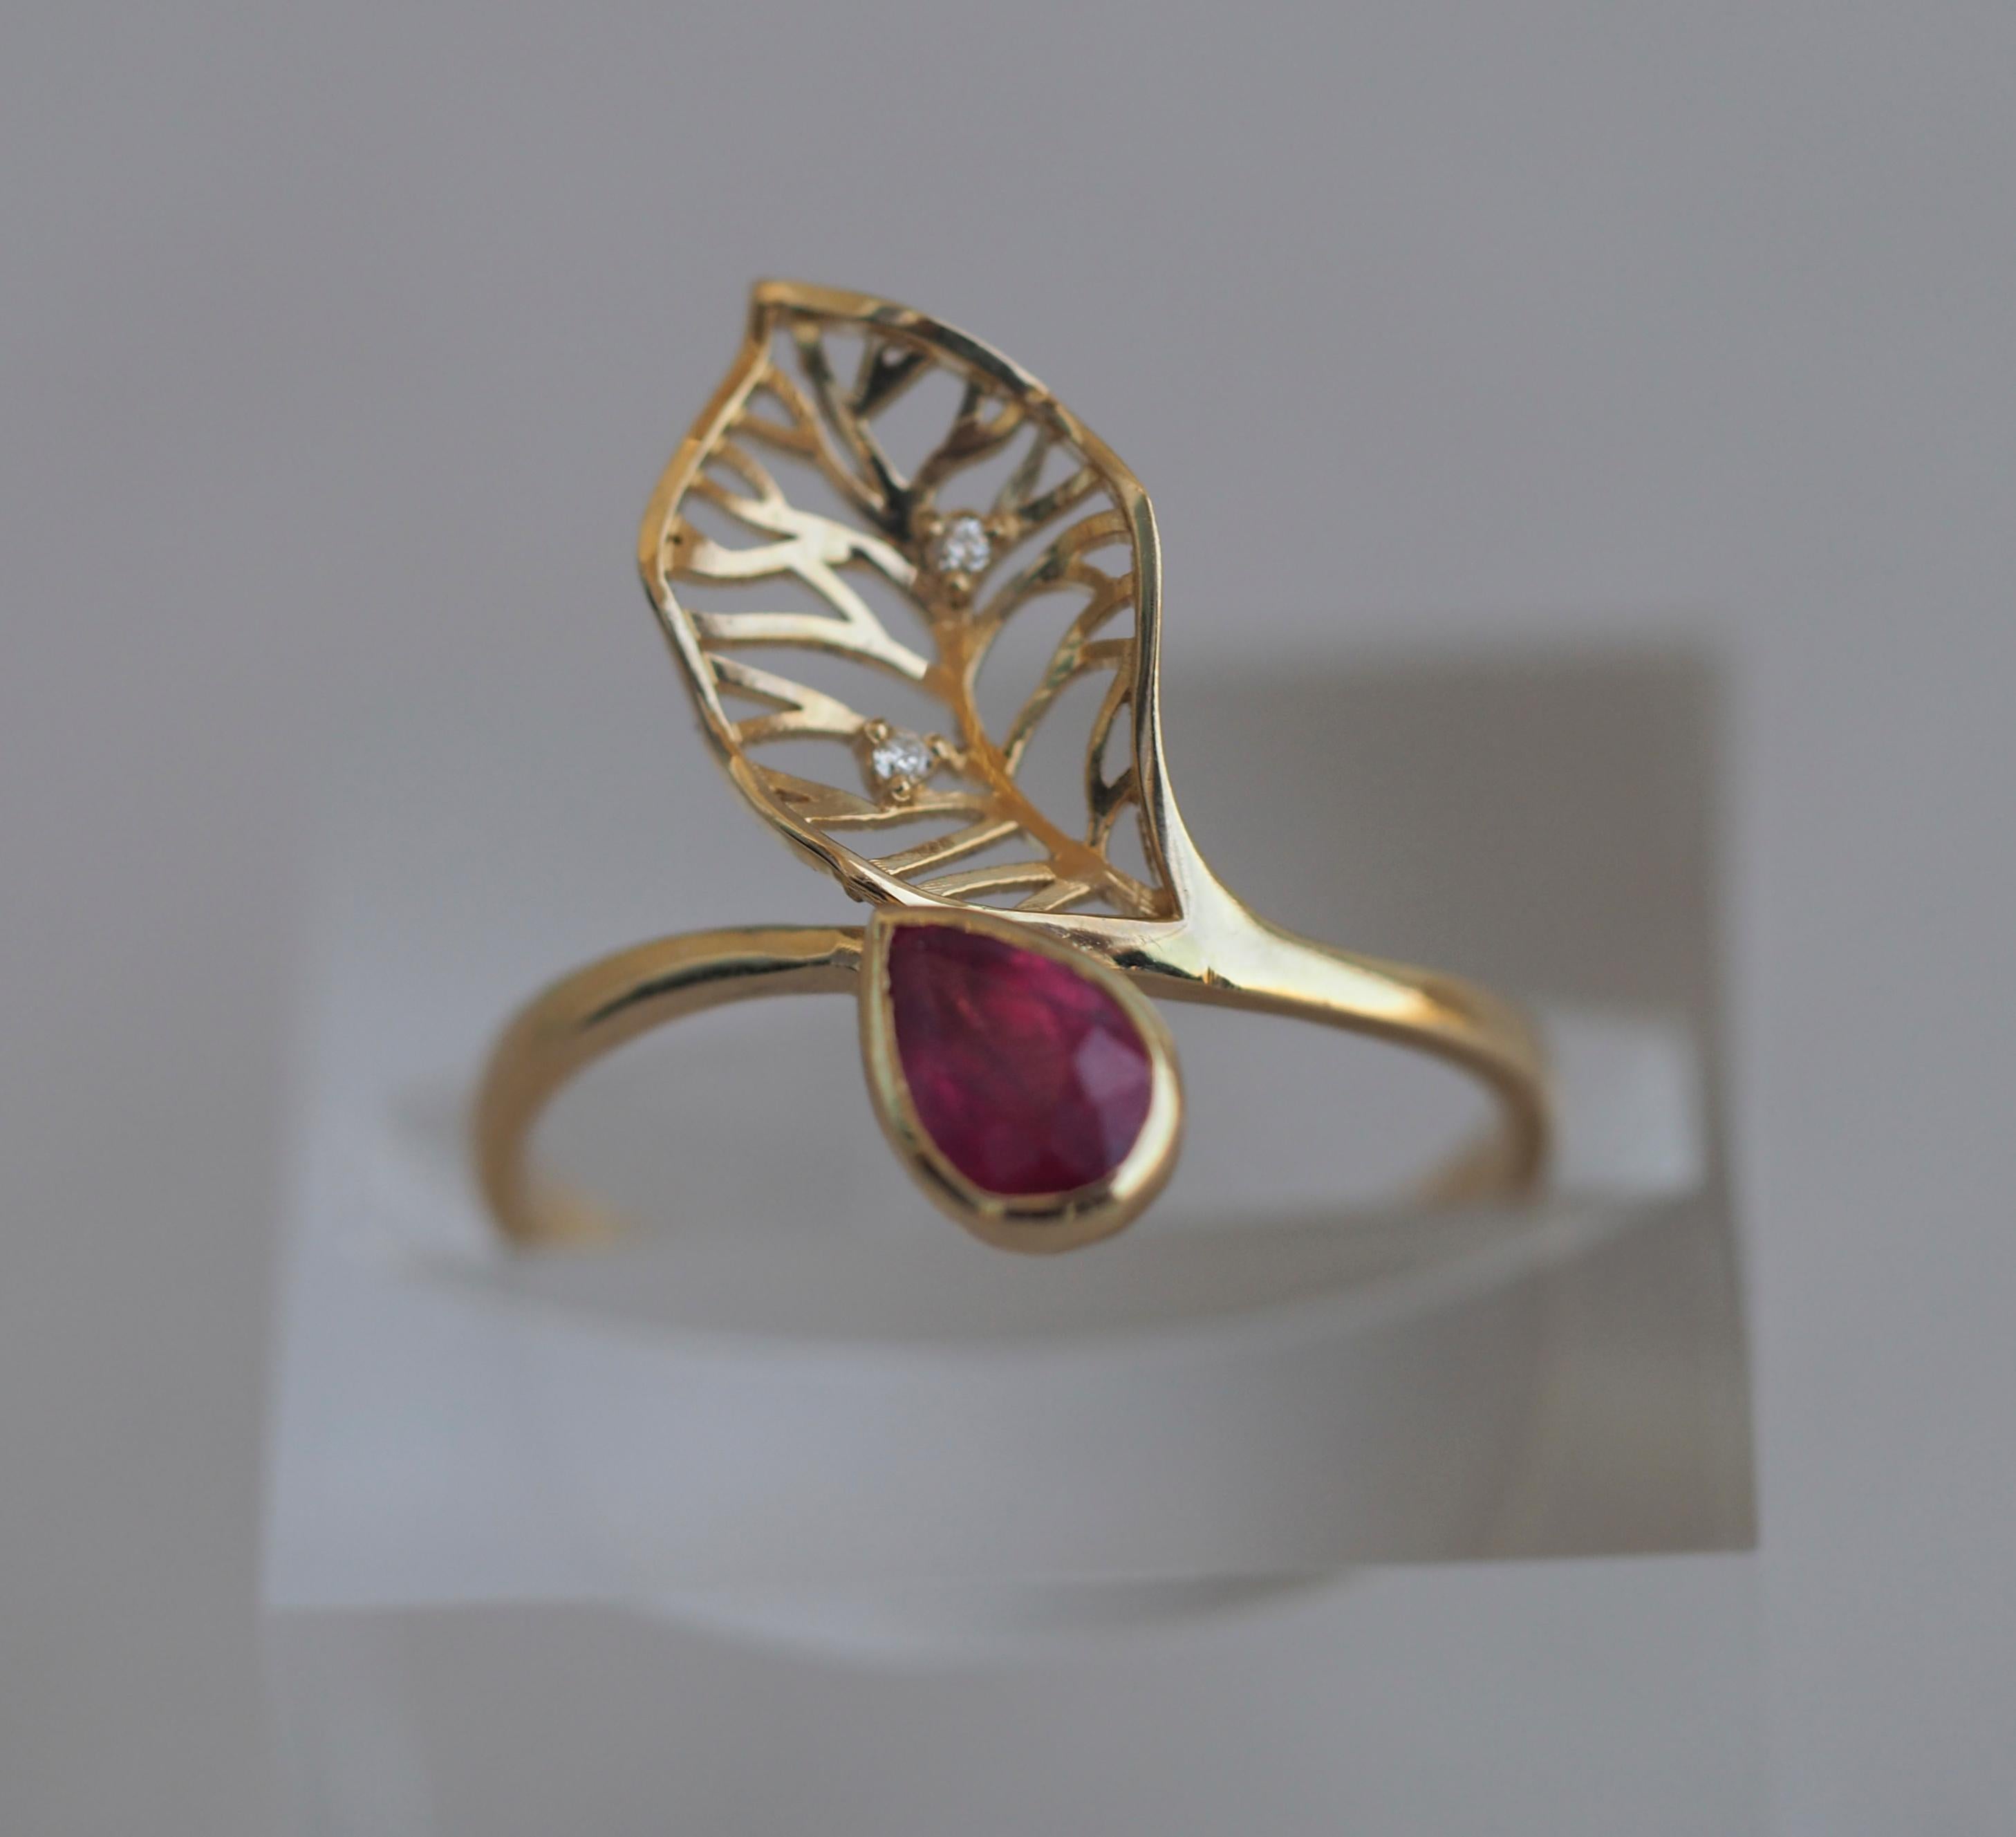 For Sale:  14 Kt Gold Ring with Ruby and Diamonds, Gold Flower Ring, Leaf Gold Ring 7